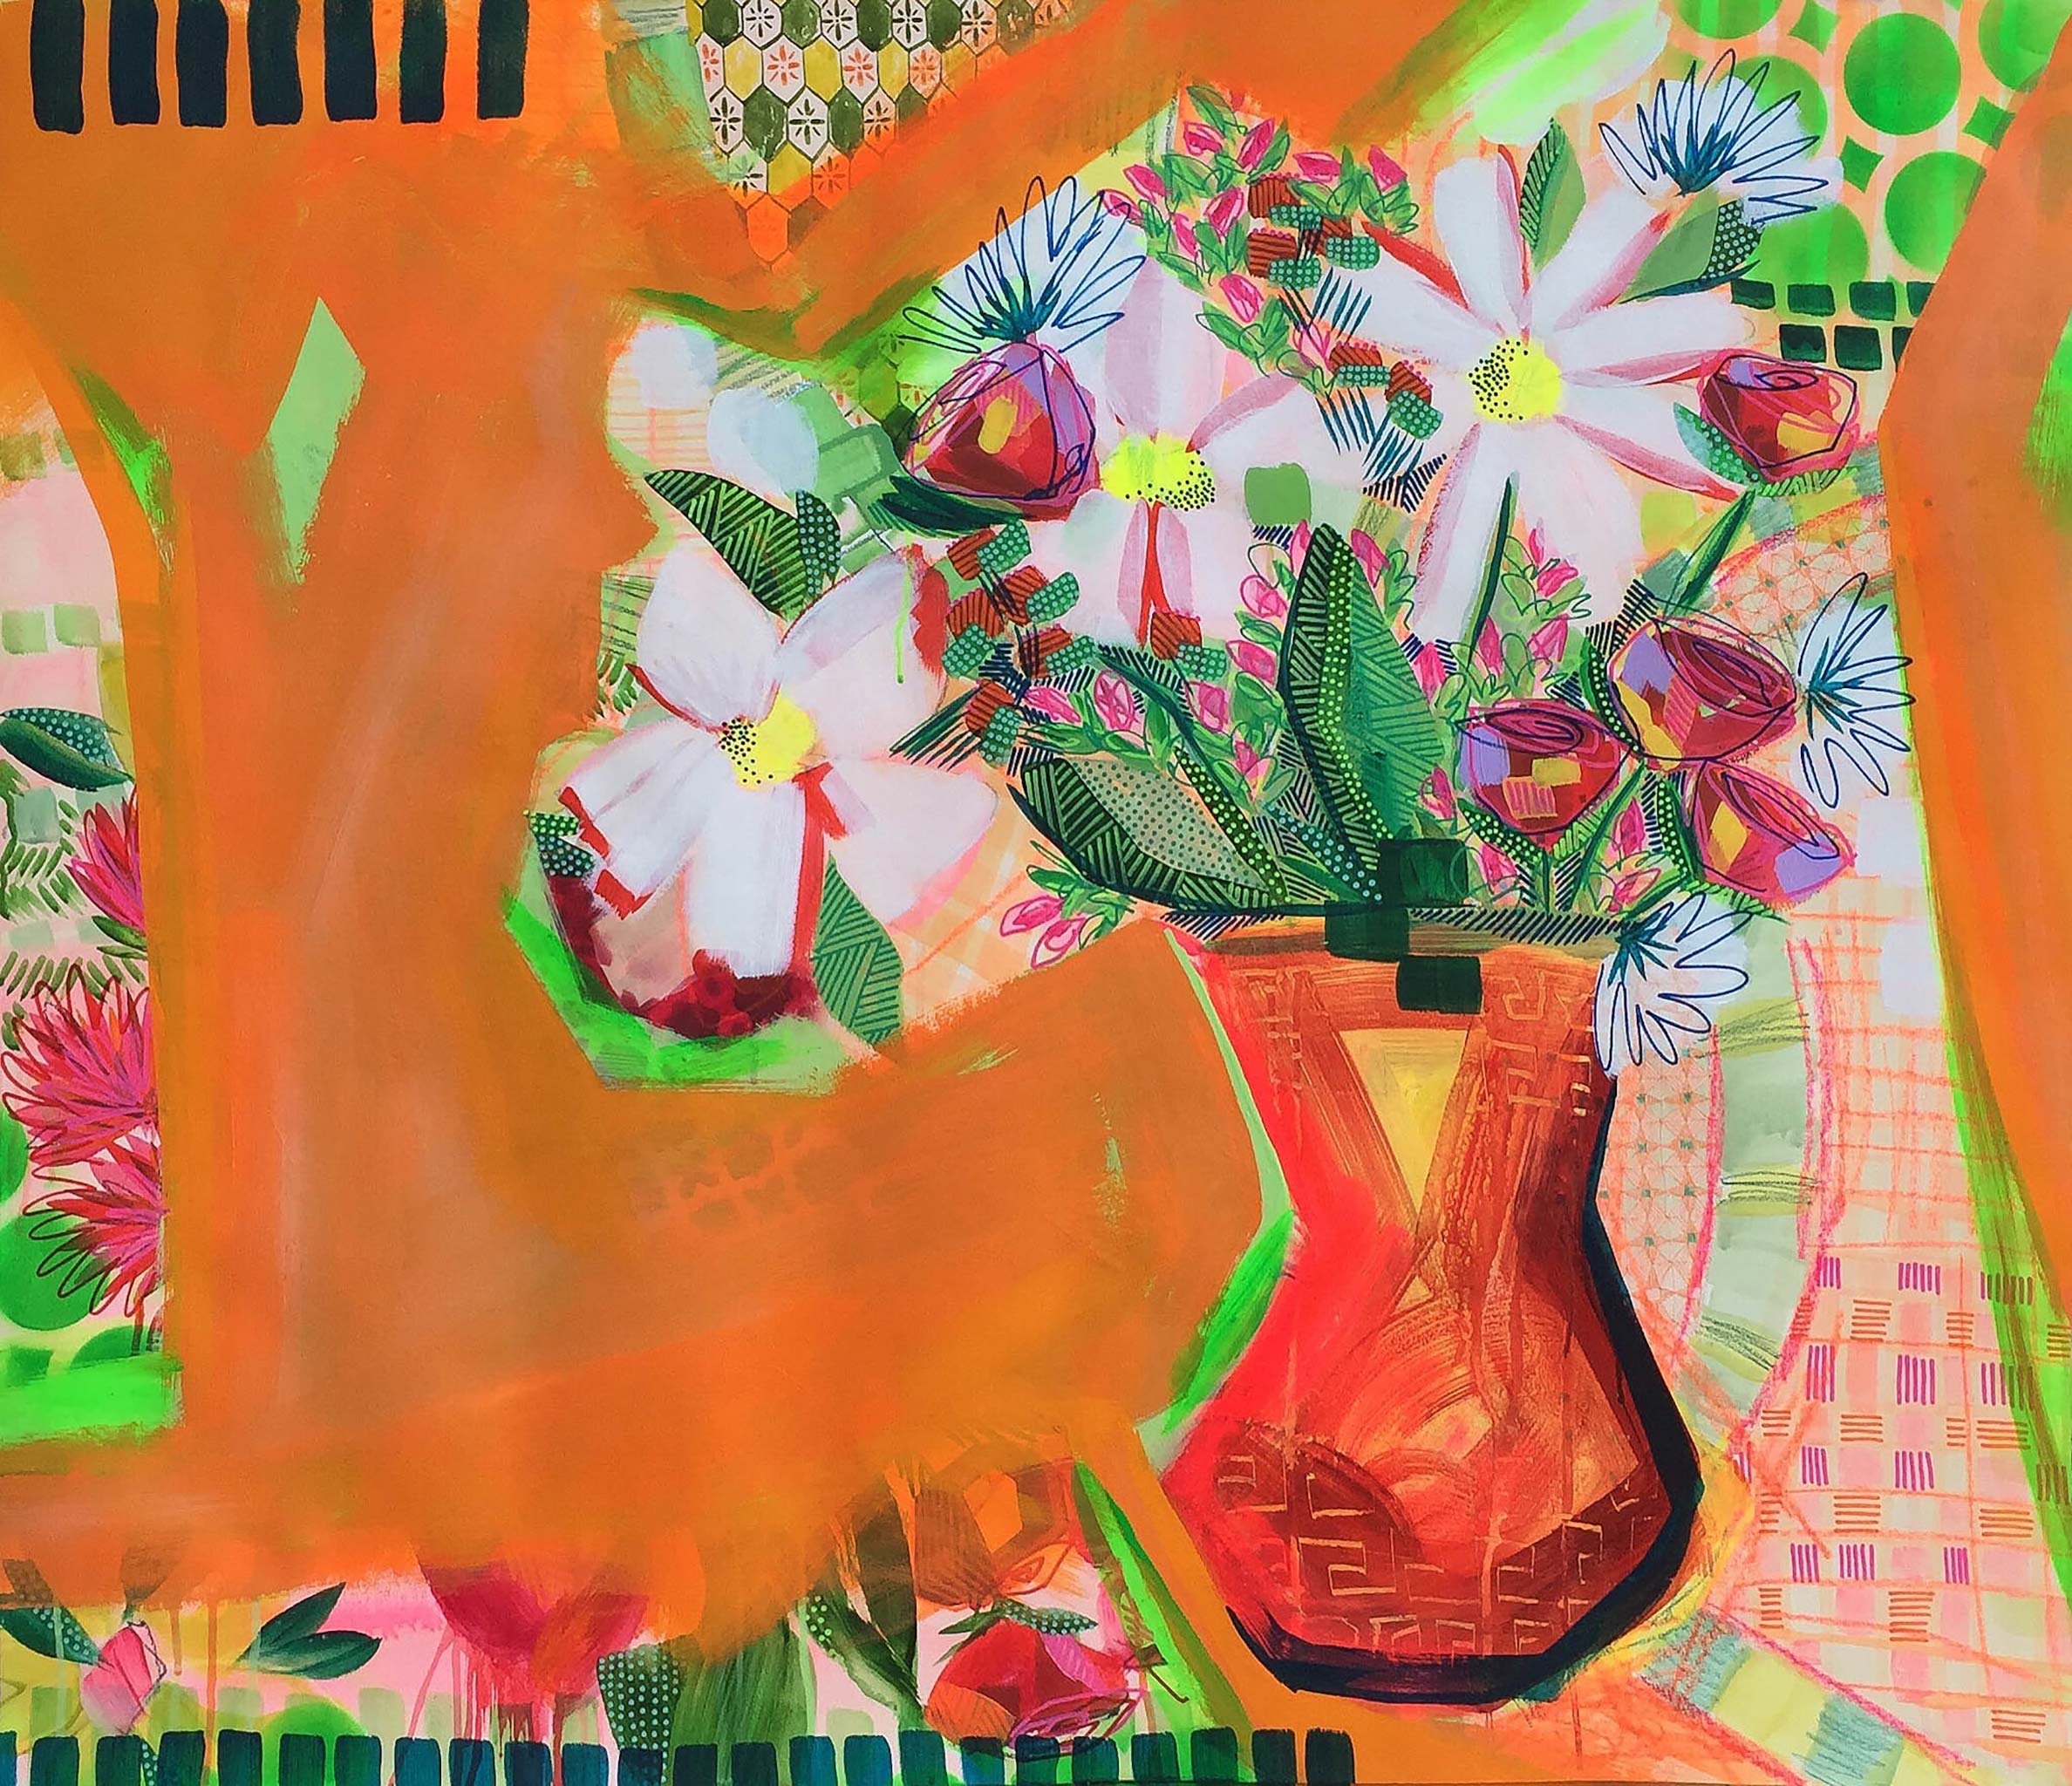 Painterly daisies in an orange vase mixed with geometric textile patterns.